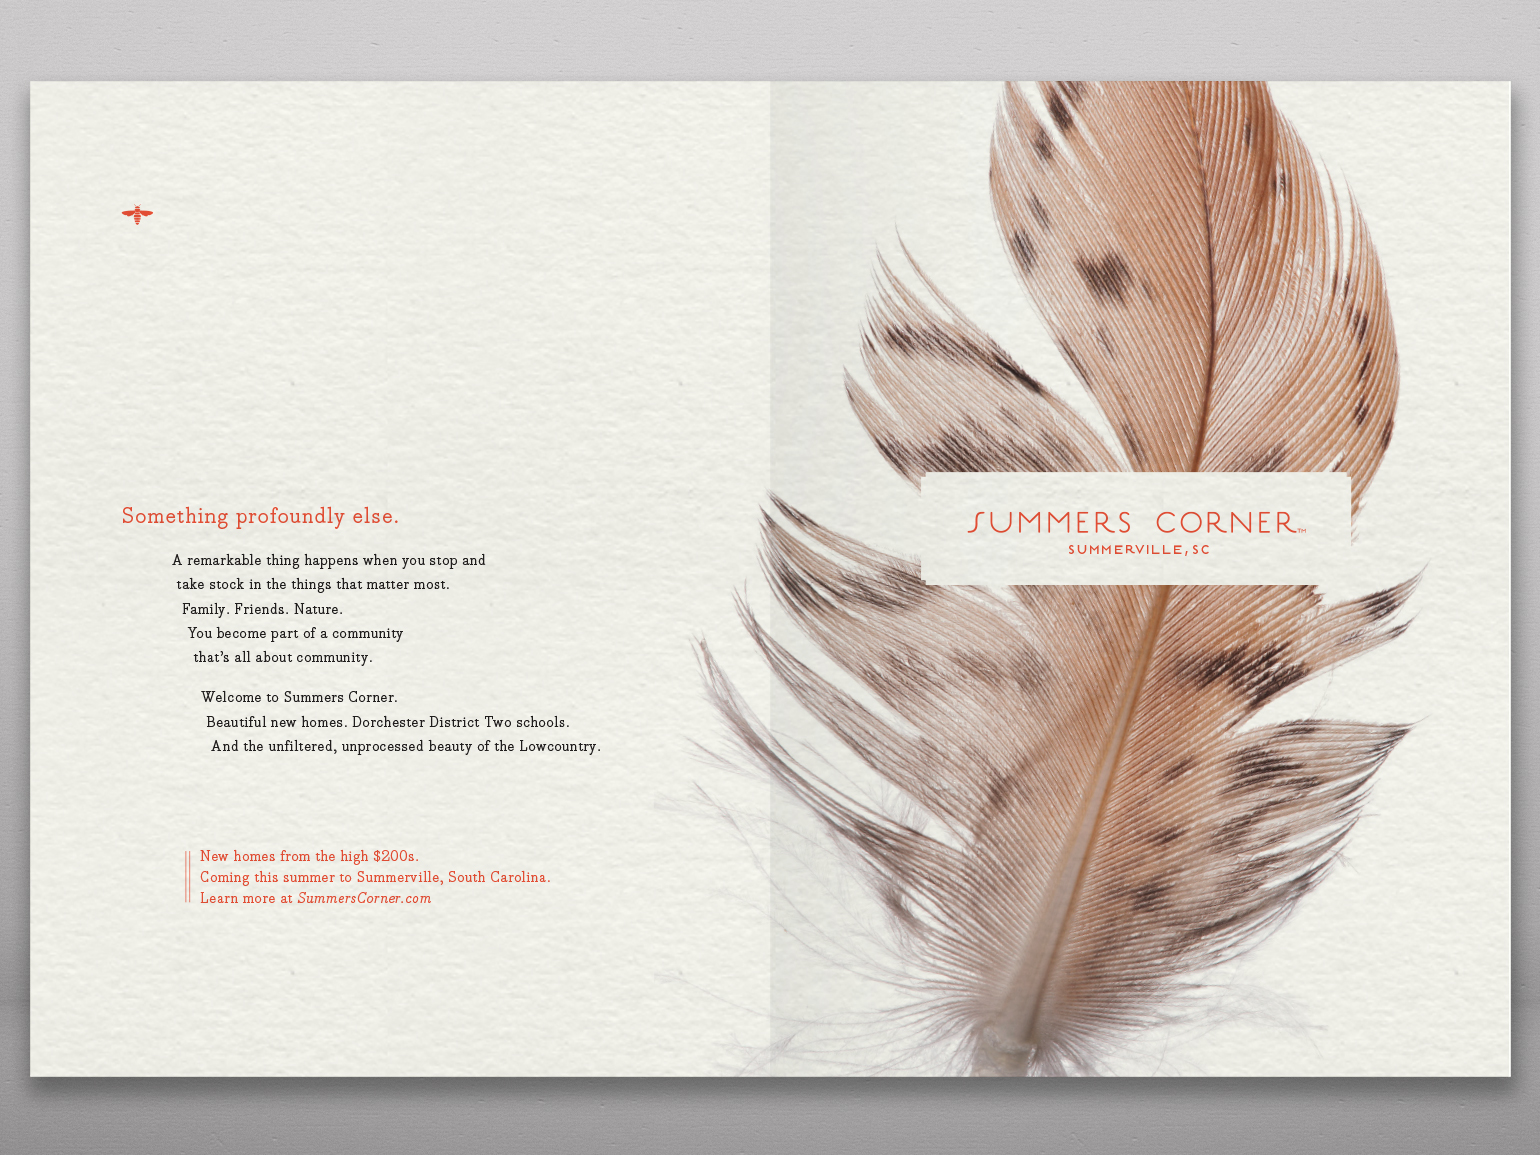 Summers Corner Feather Spread 2